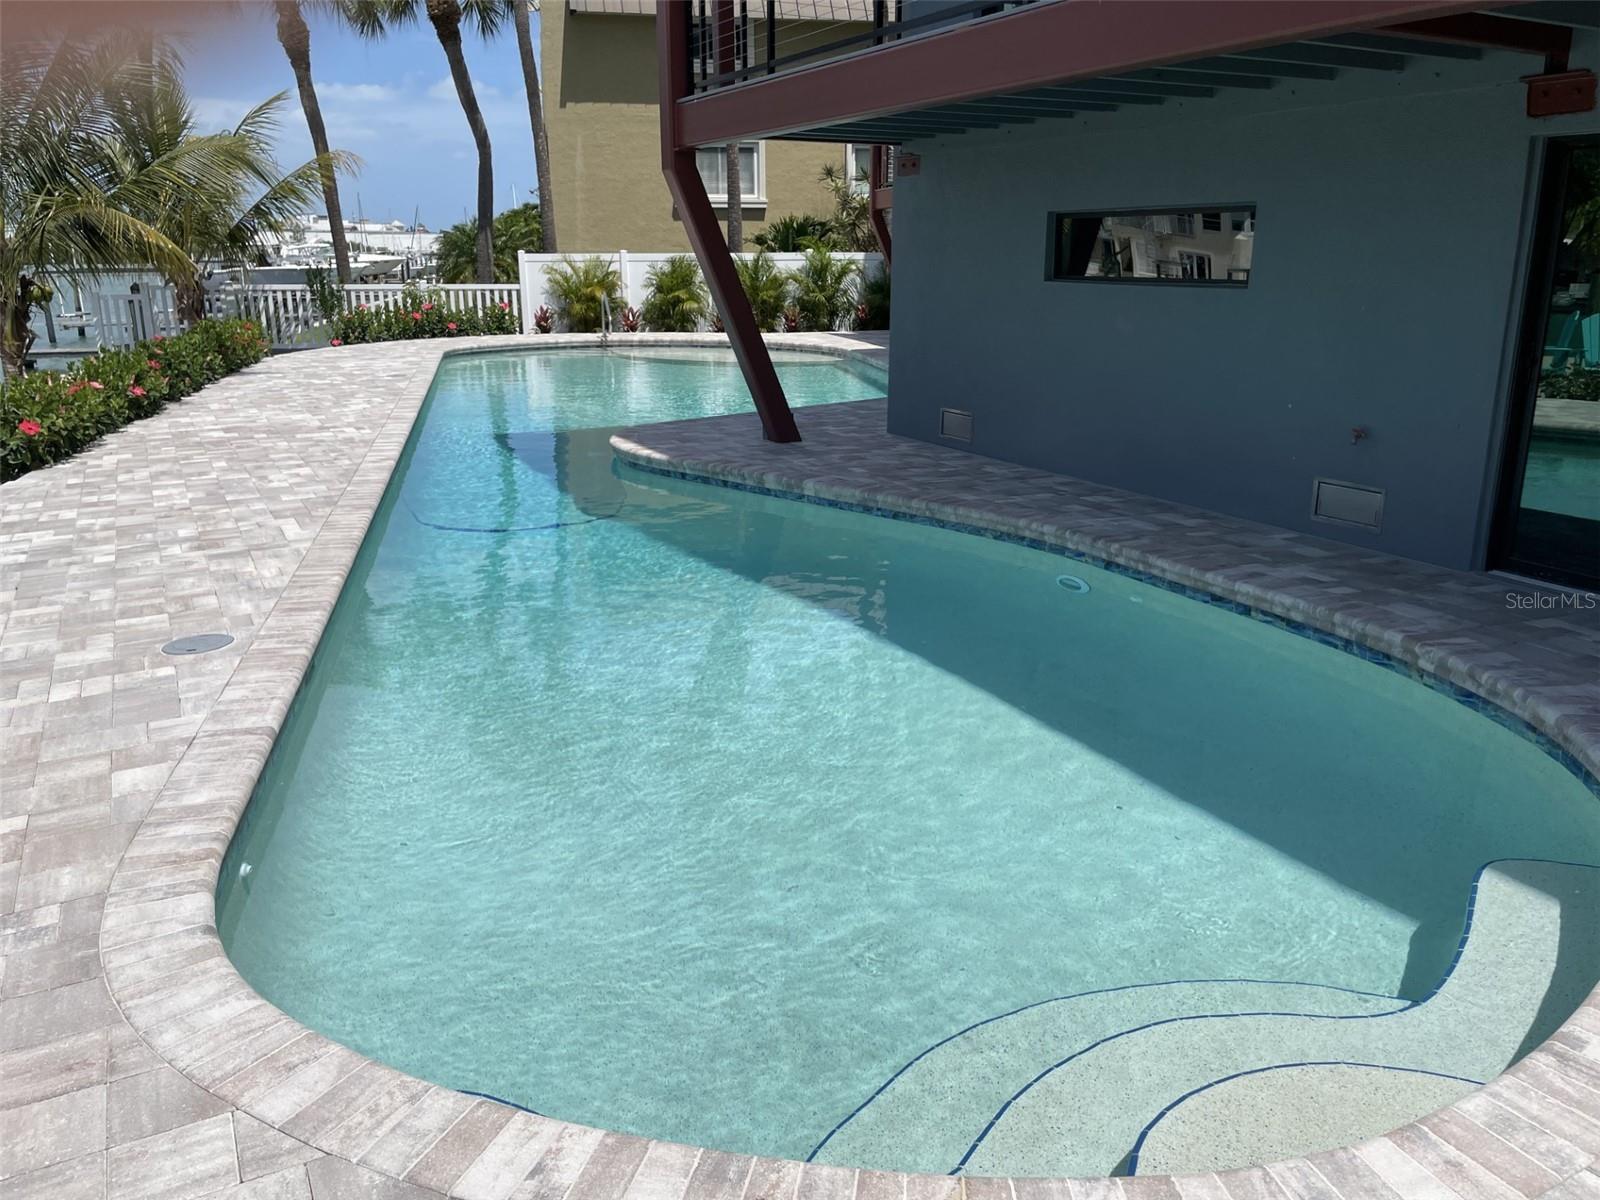 Stairs on both ends of pool